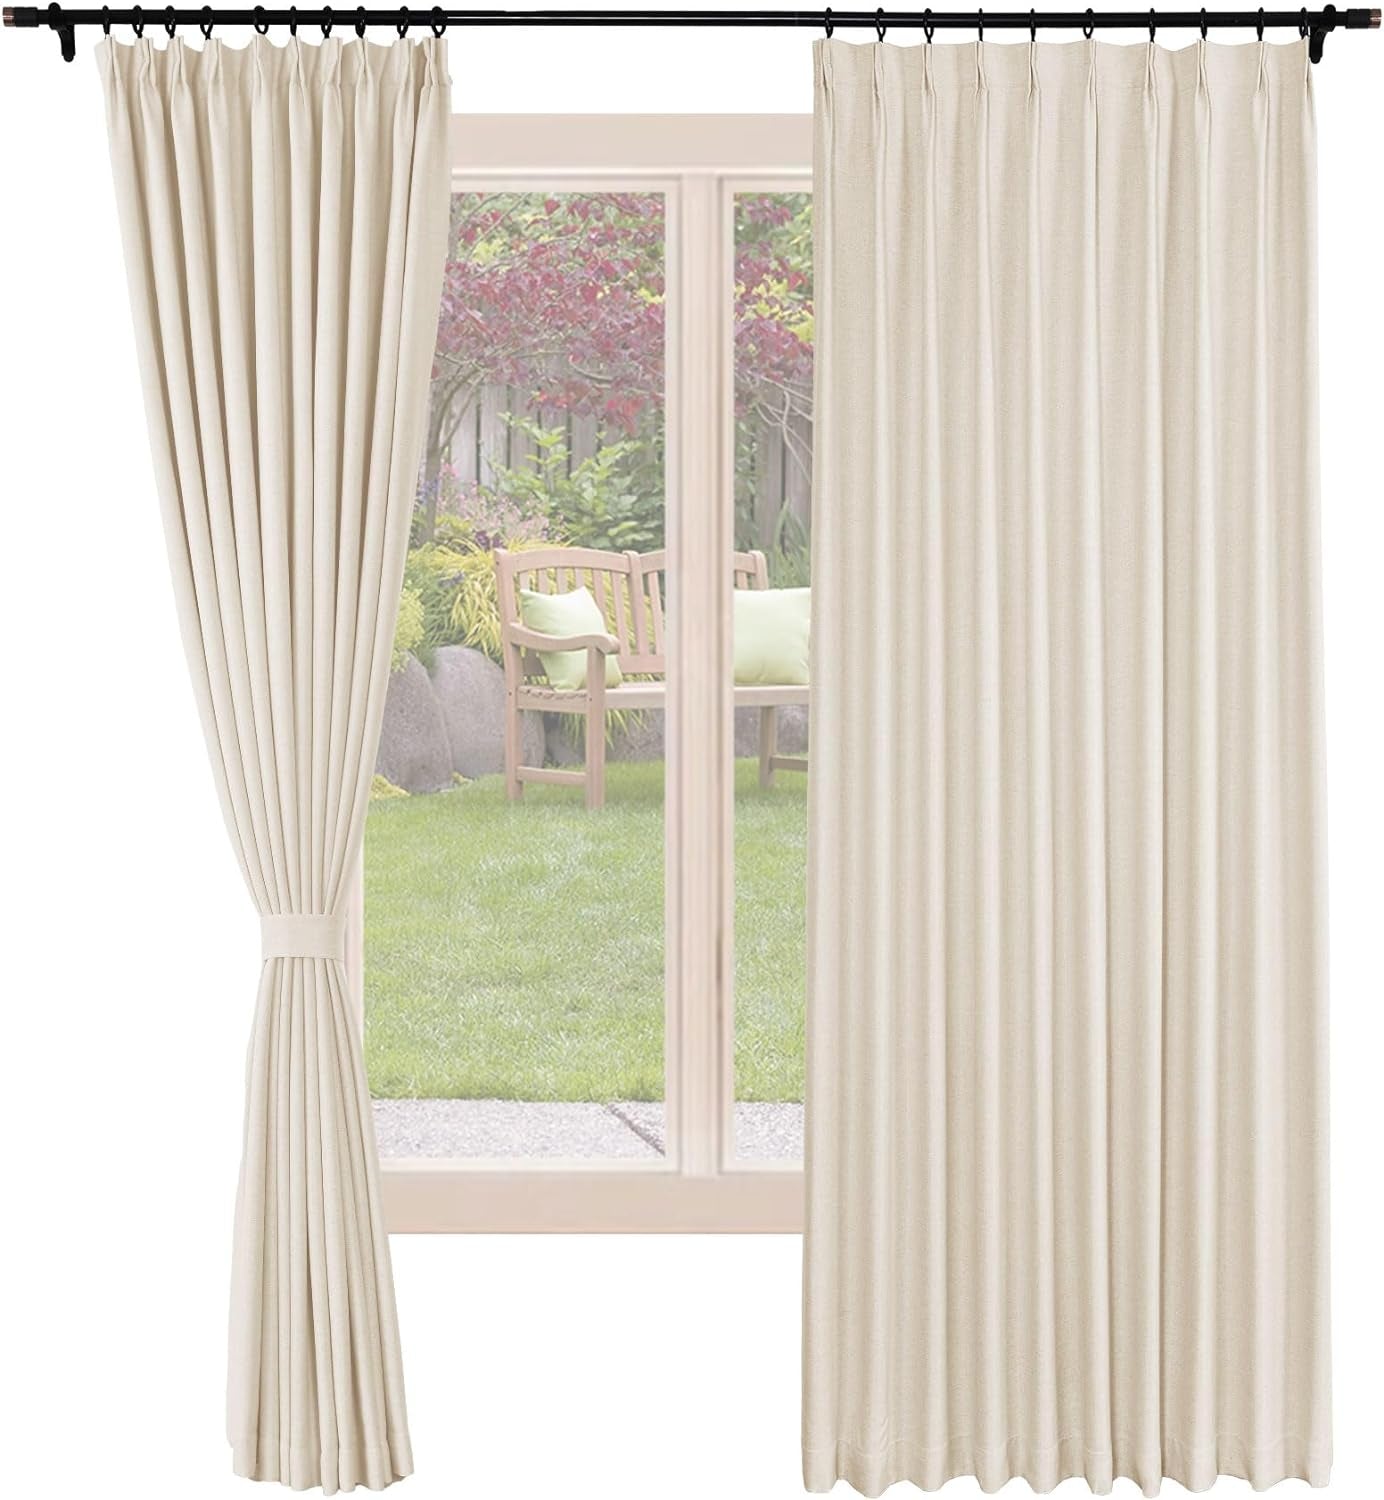 Frelement Blackout Curtains Natural Linen Curtains Pinch Pleat Drapery Panels for Living Room Thermal Insulated Curtains, 52" W X 63" L, 2 Panels, Oasis  Frelement 07 Sand Beige (52Wx84L Inch)*2 